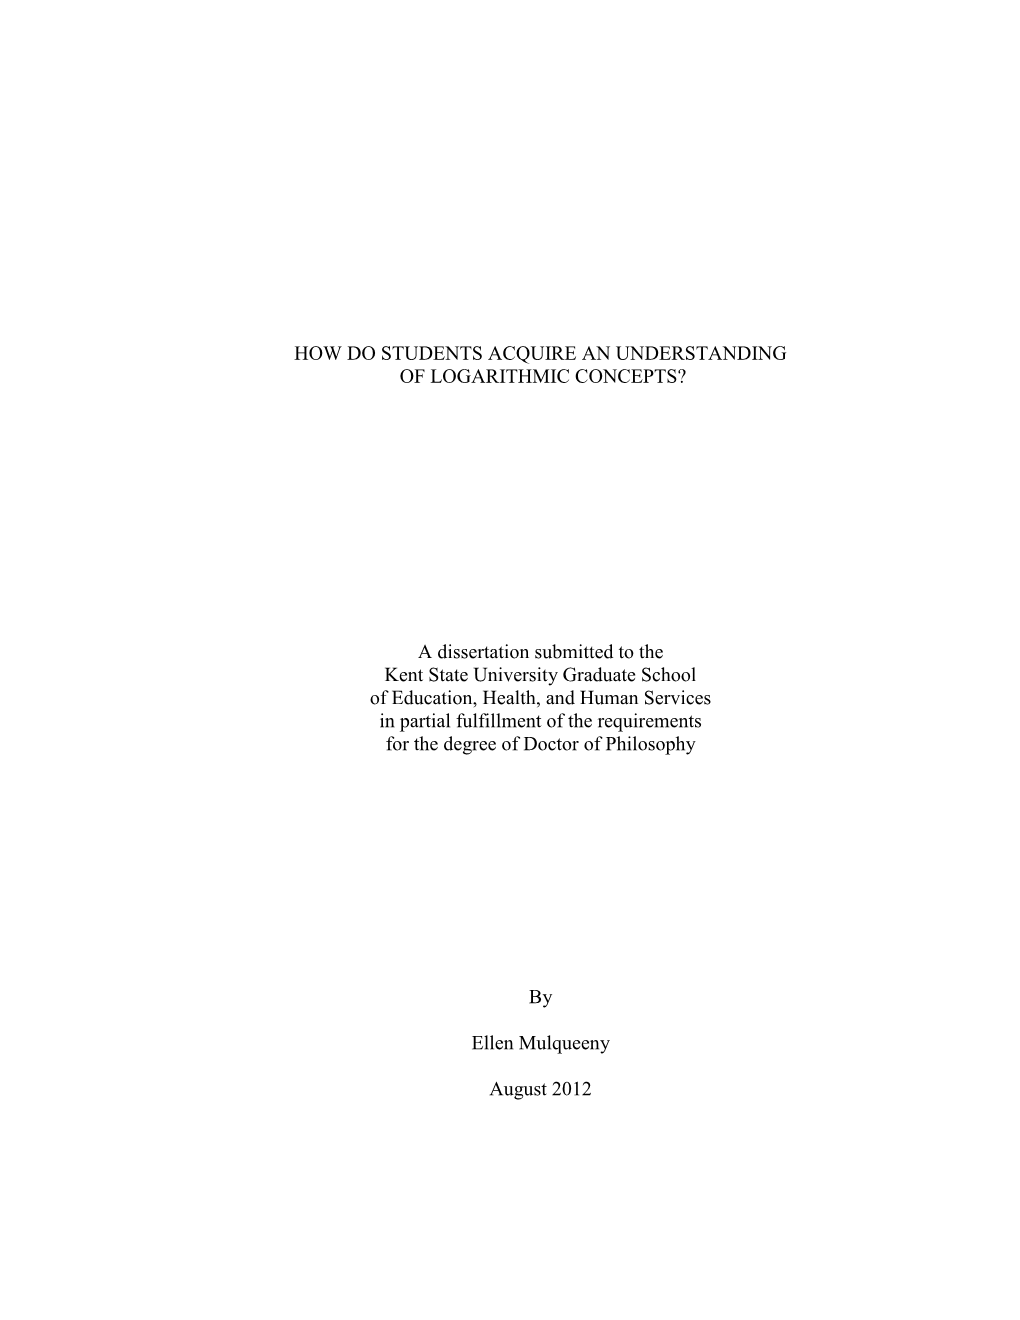 A Dissertation Submitted to the Kent State University Graduate